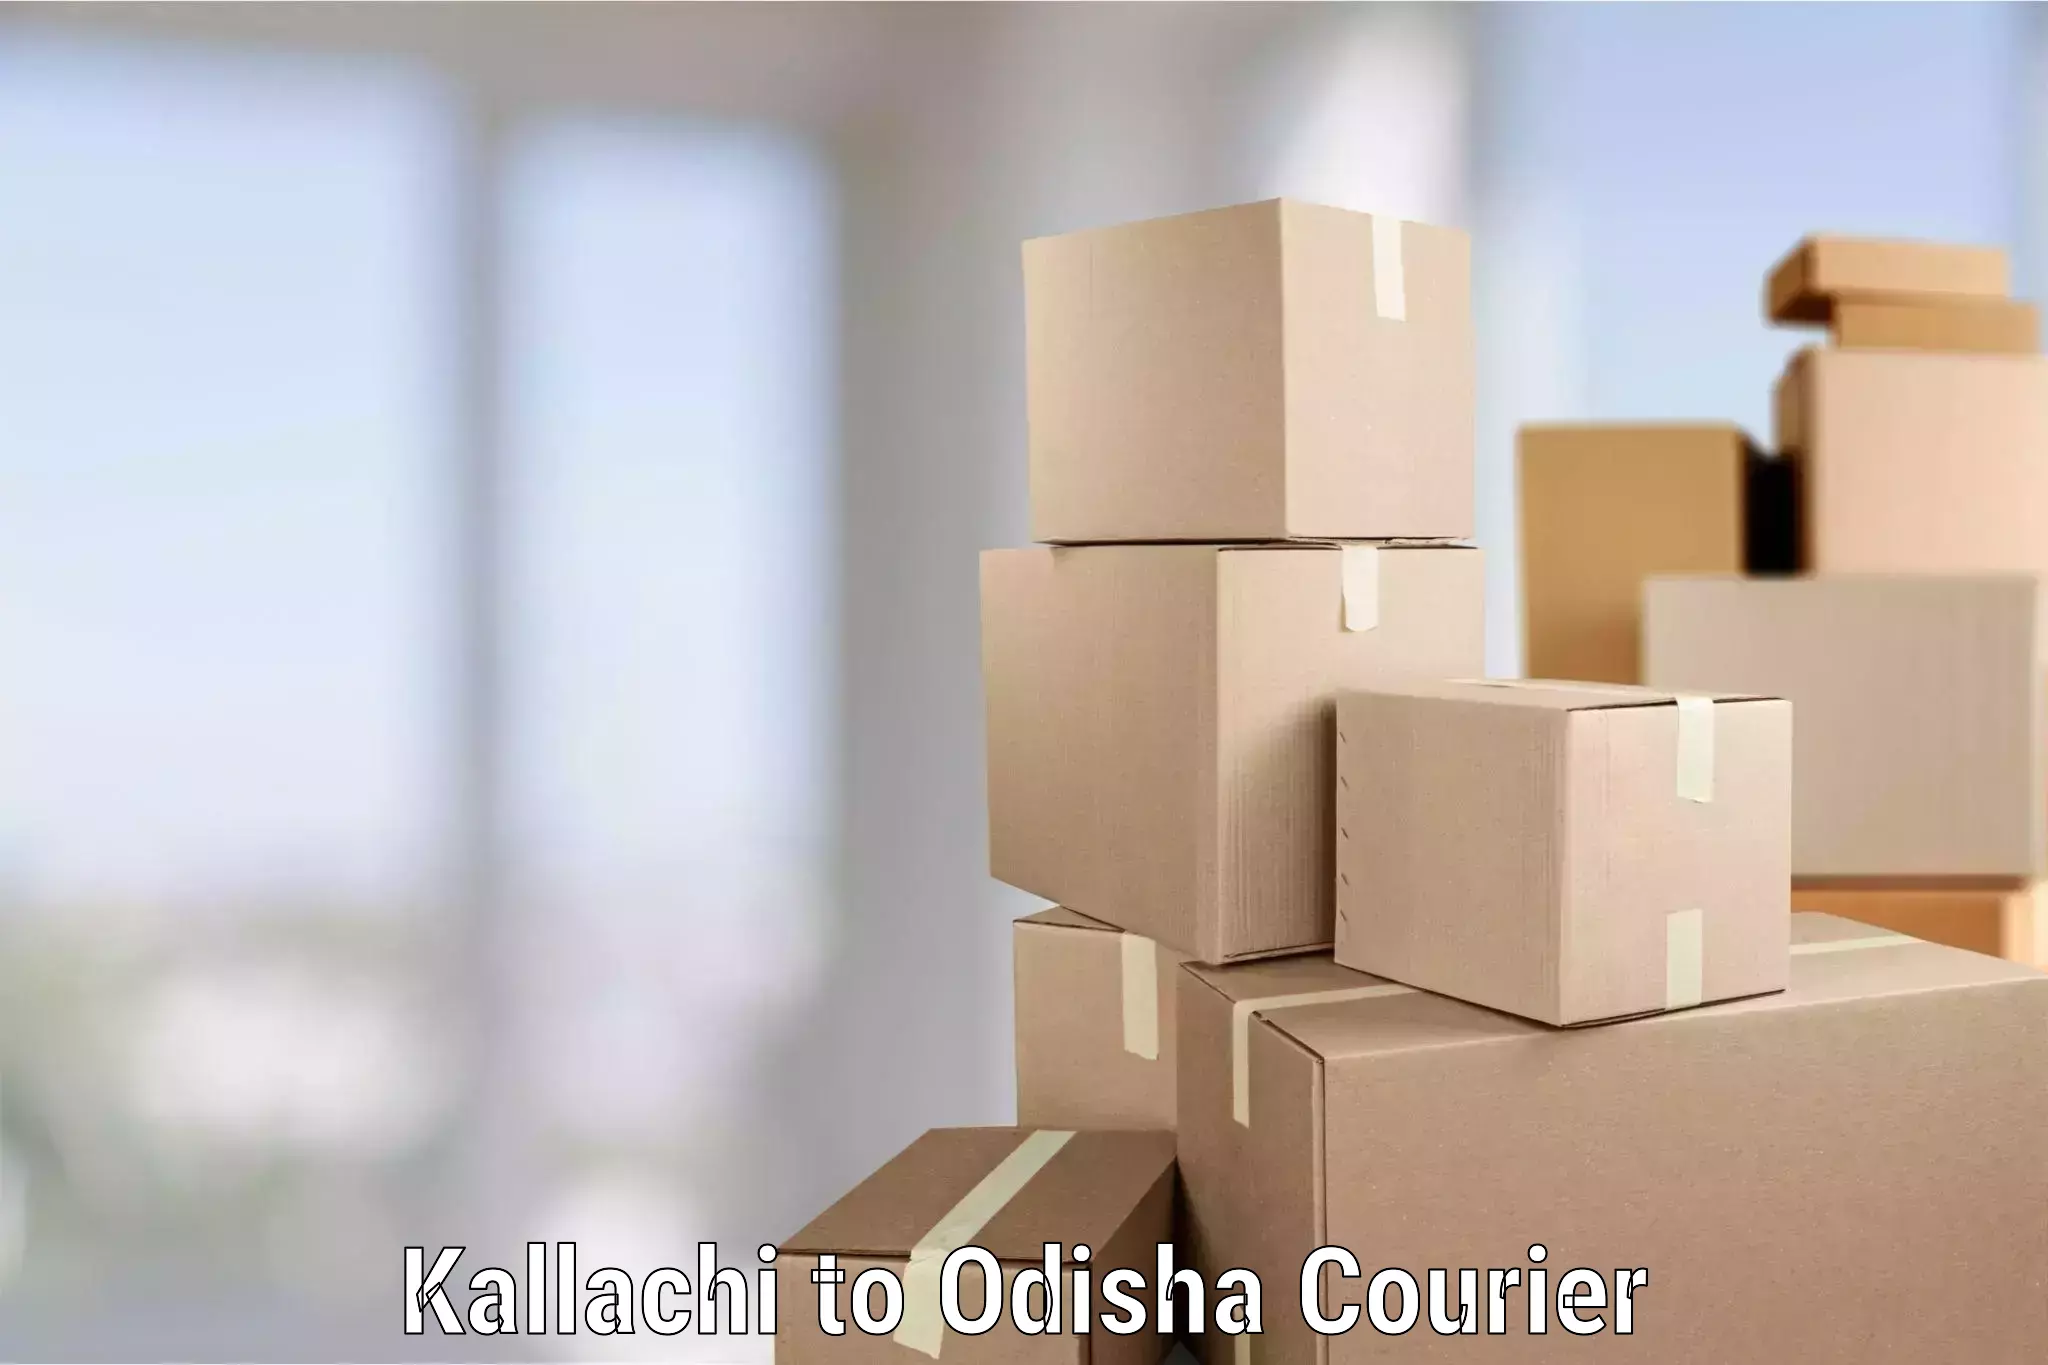 Moving and handling services in Kallachi to Odisha